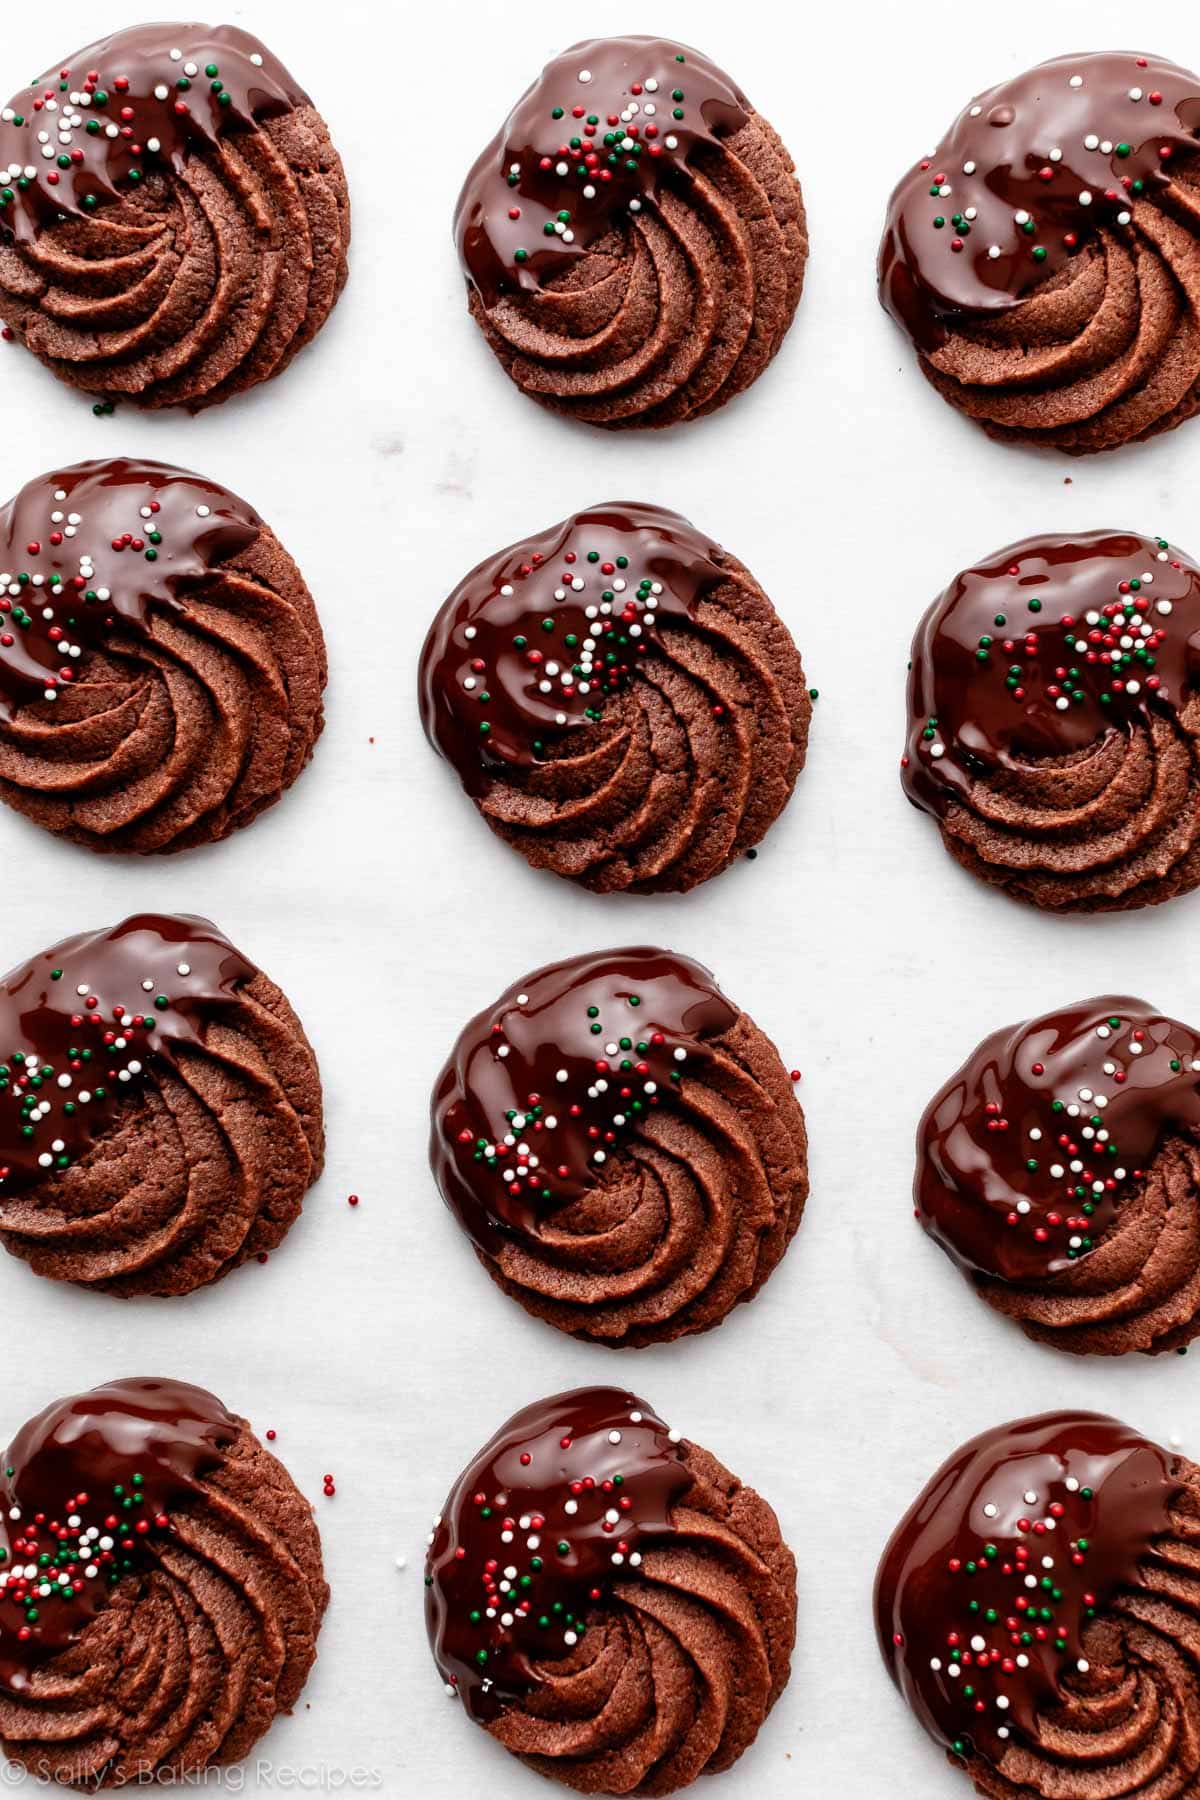 piped chocolate butter cookies dipped in chocolate with nonpareils on top.